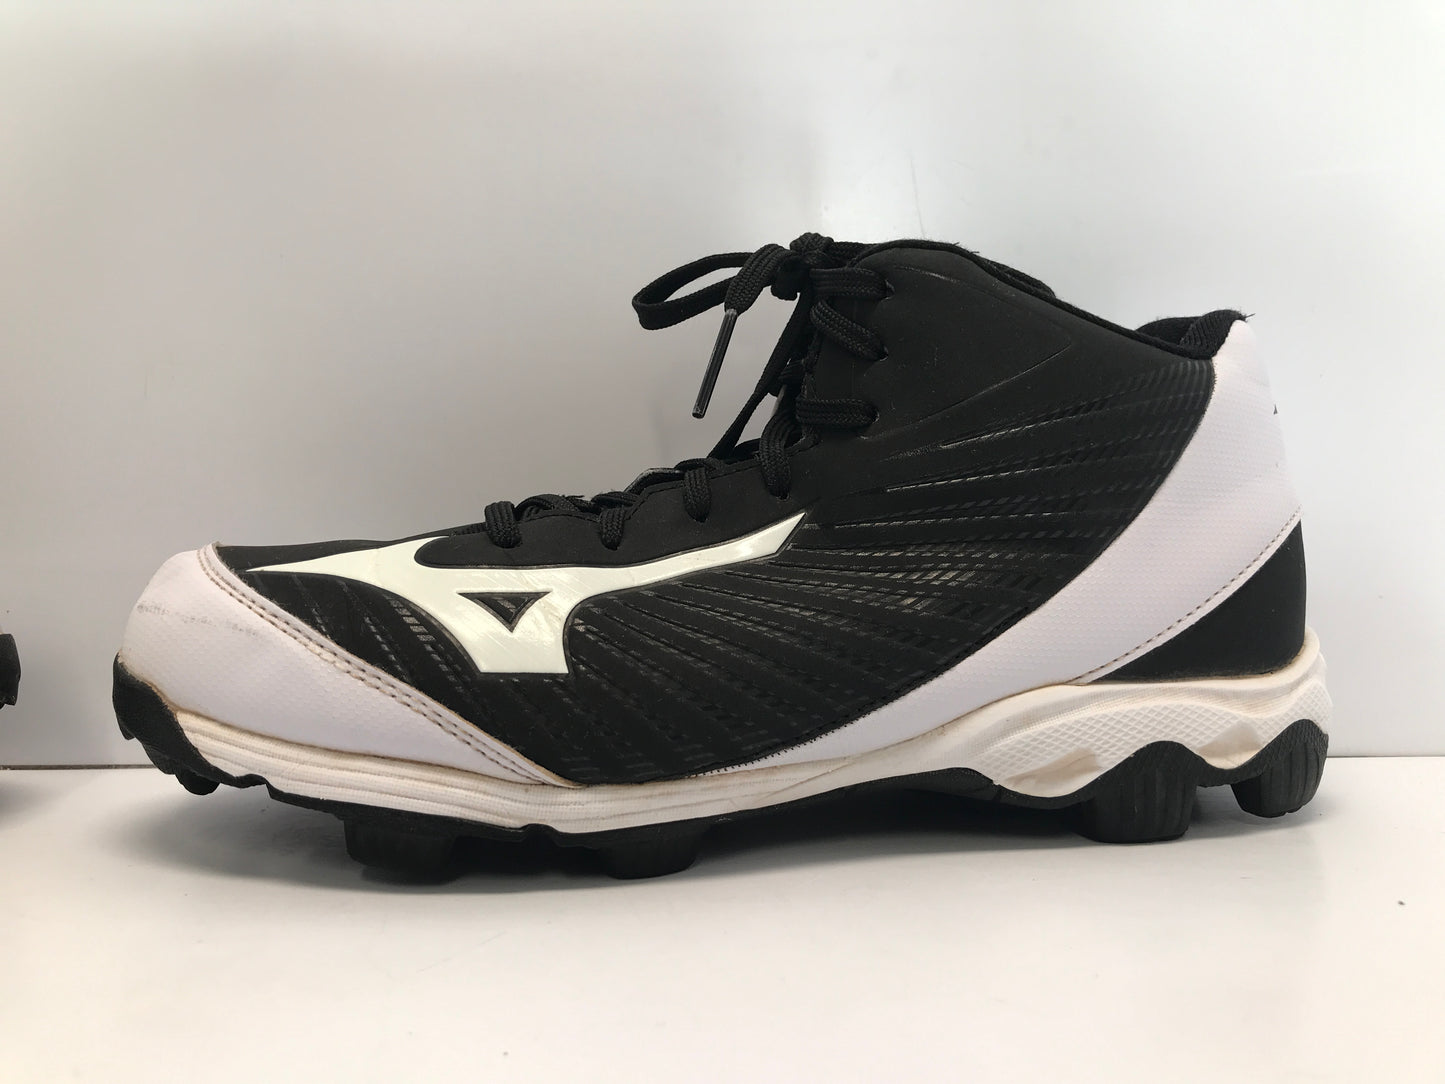 Baseball Shoes Cleats Men's Size 8 Mizuno High Tops Black White Excellent